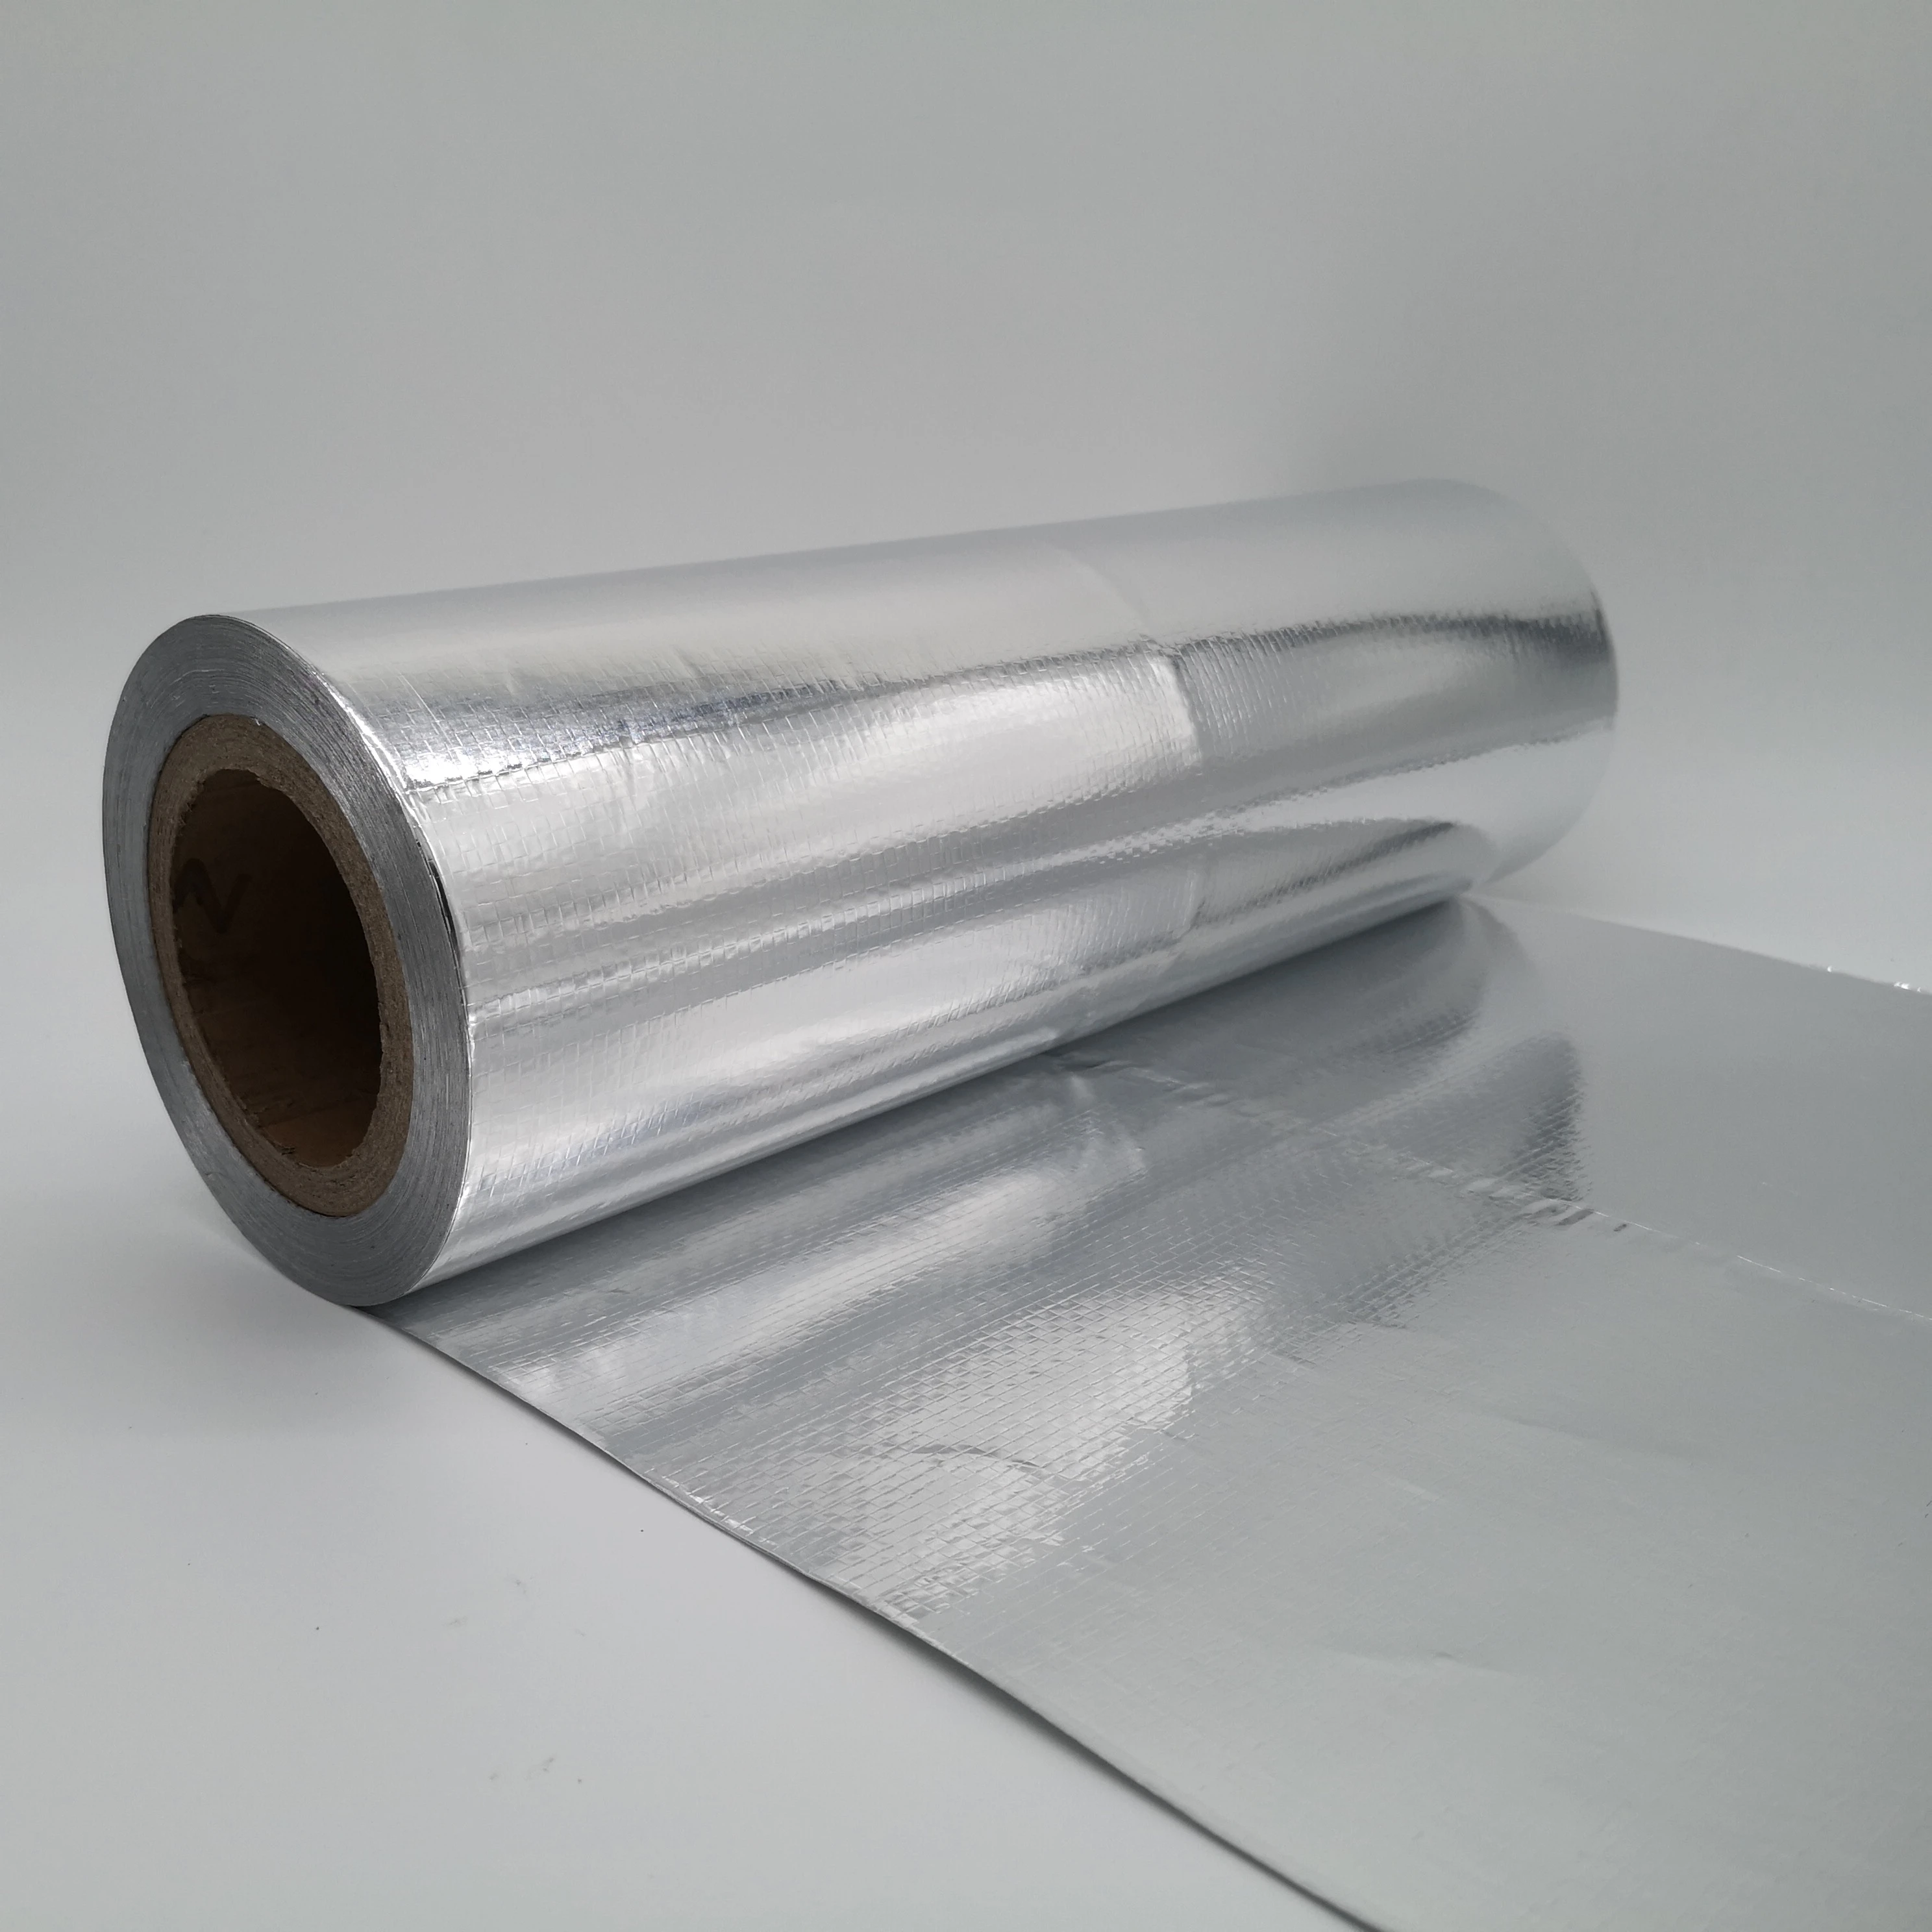 Antiglare container liner Woven fabric backed aluminum foil thermal insulation